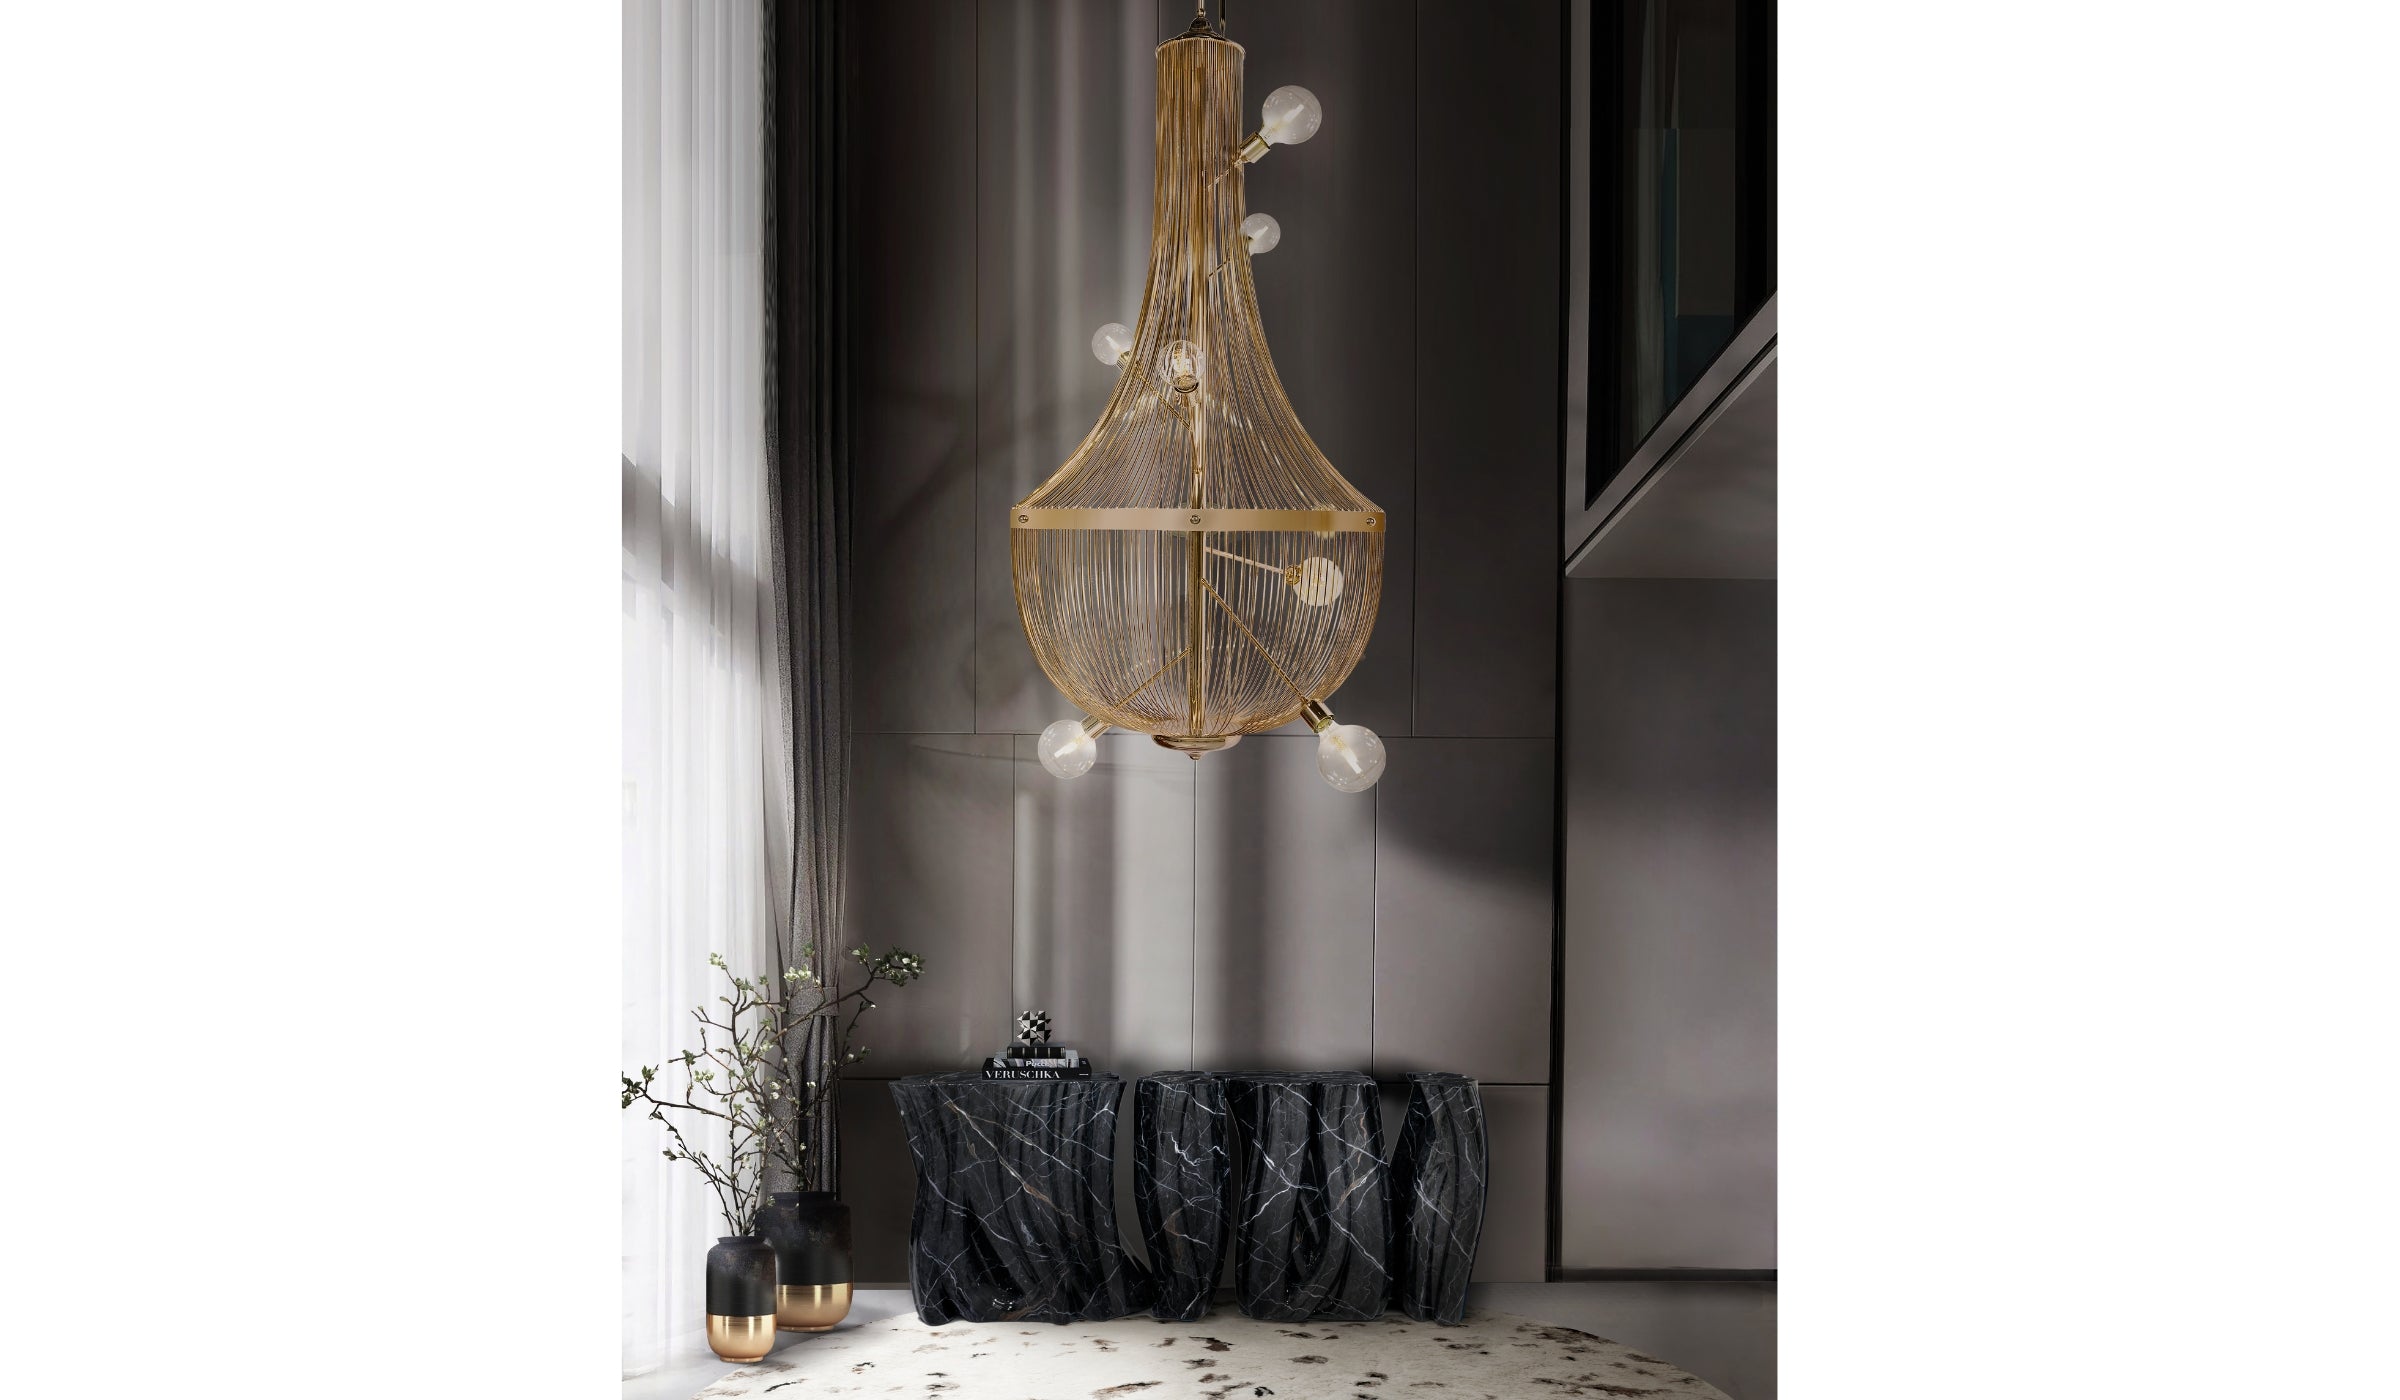 L'Chandelier - Gold-plated brass pendant light for a Parisian touch